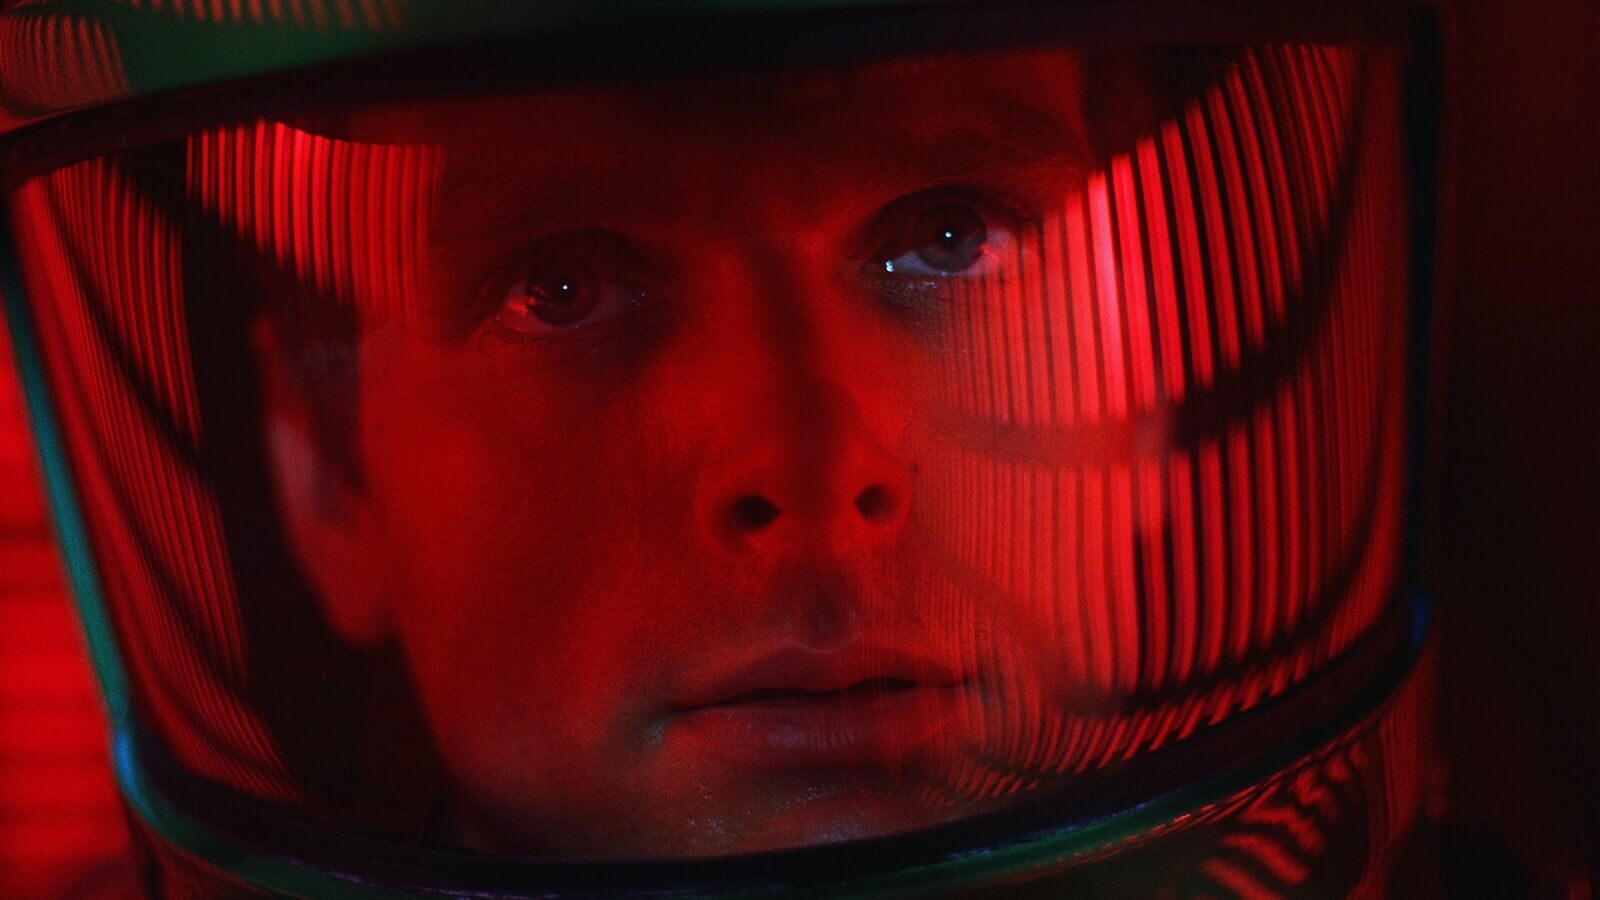 hal 2001 space odyssey meaning